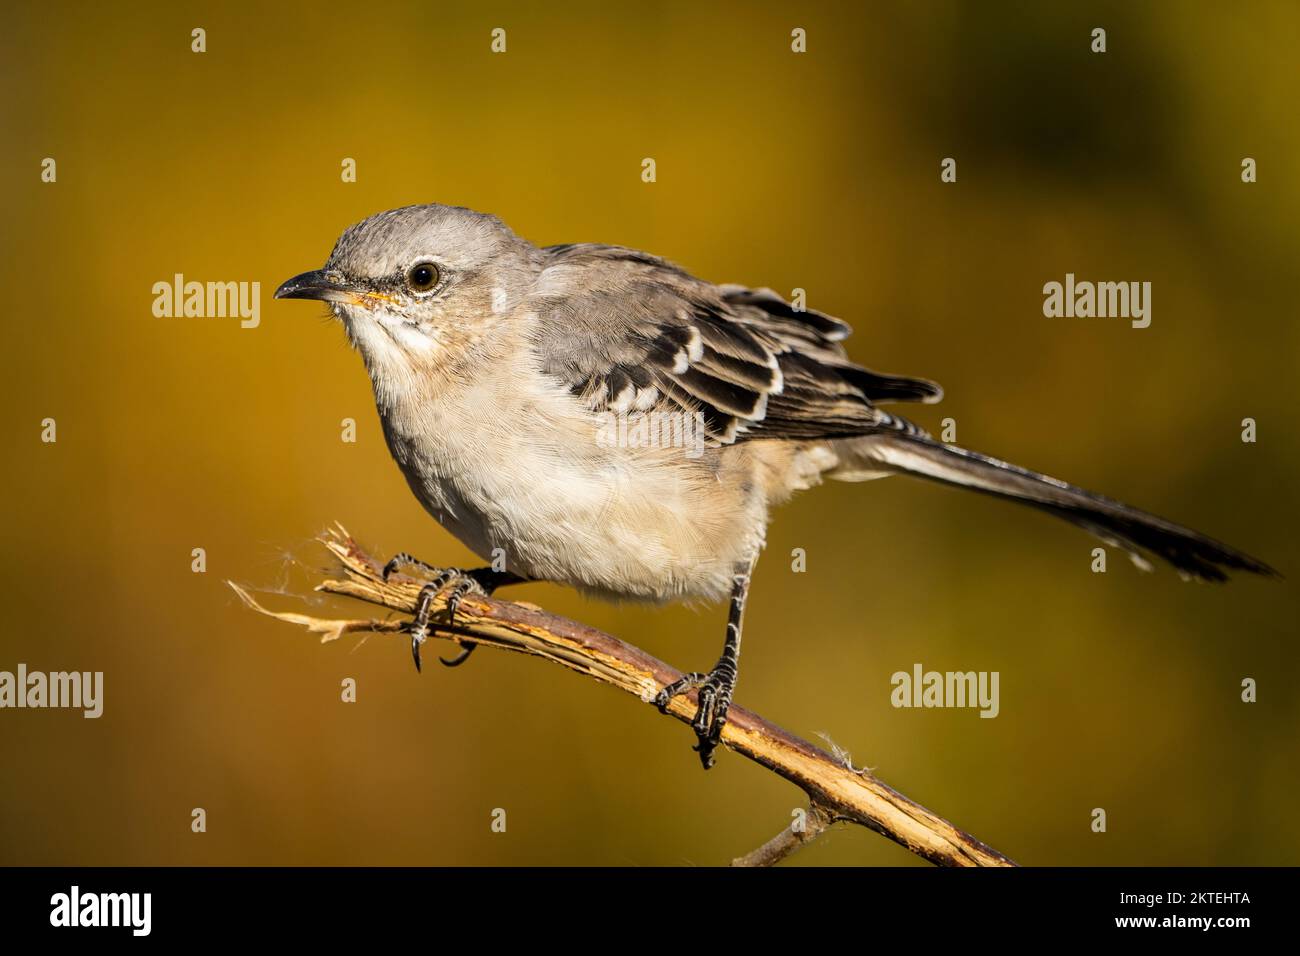 Perched mockingbird with an autumn color background. Stock Photo